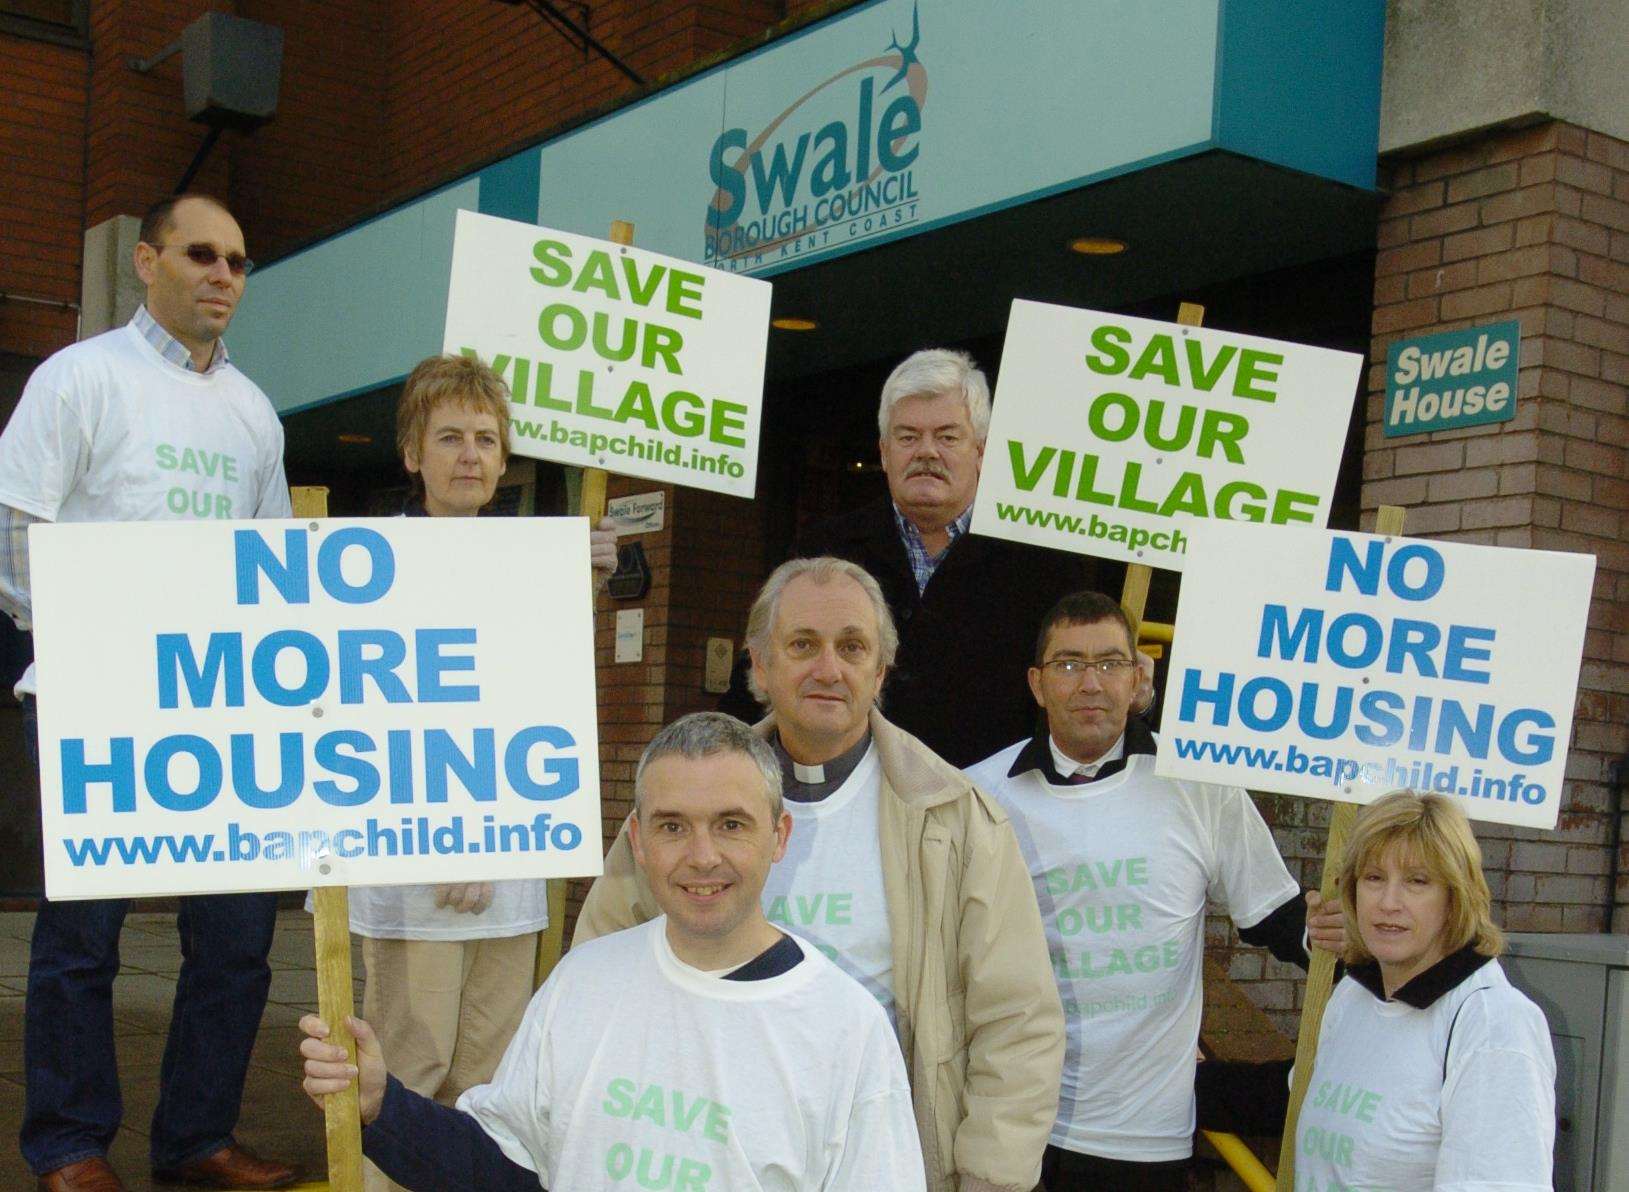 Campaigners outside Swale council